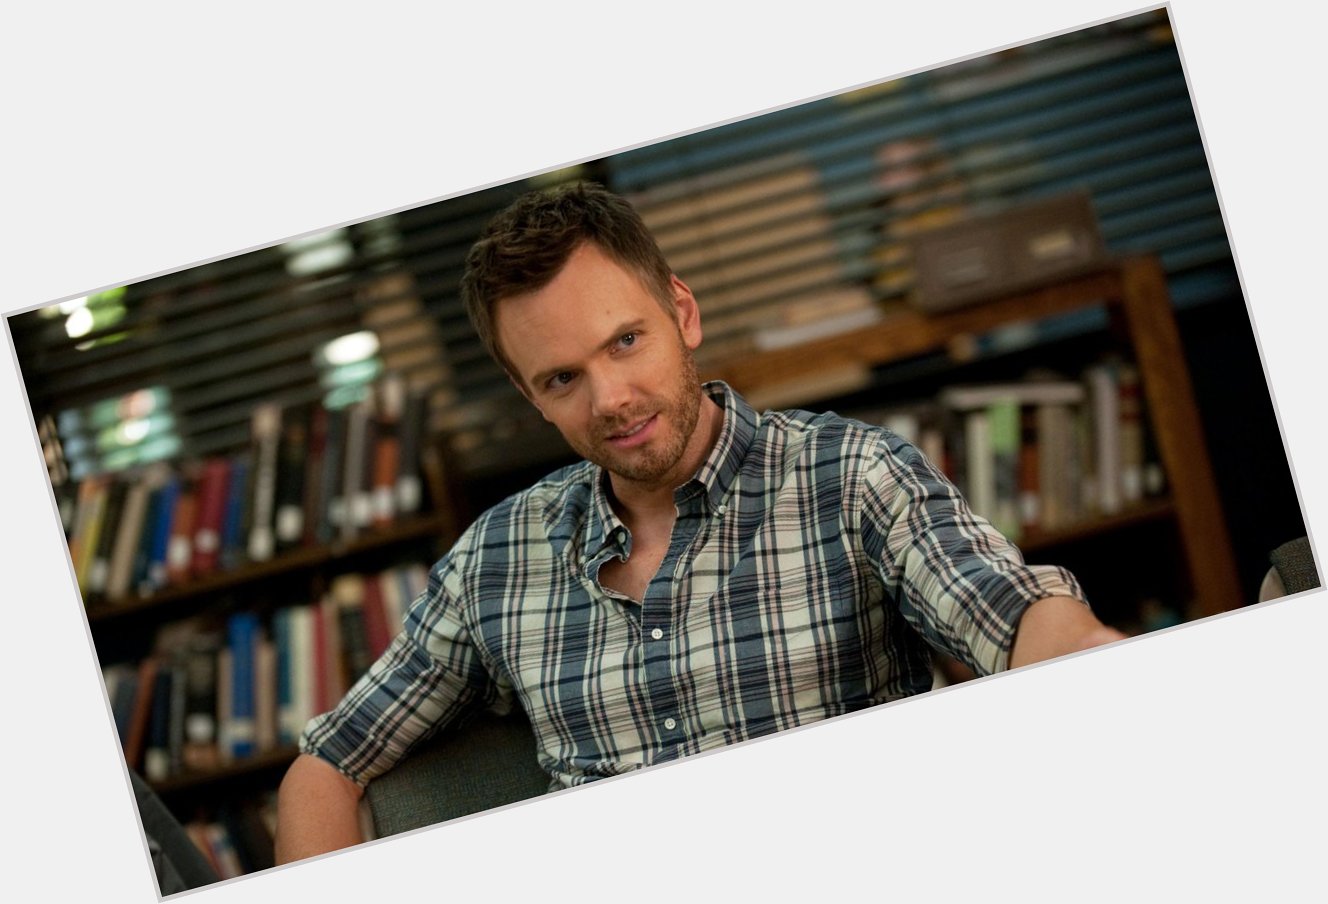 Happy Birthday to Joel McHale who turns 46 today! 